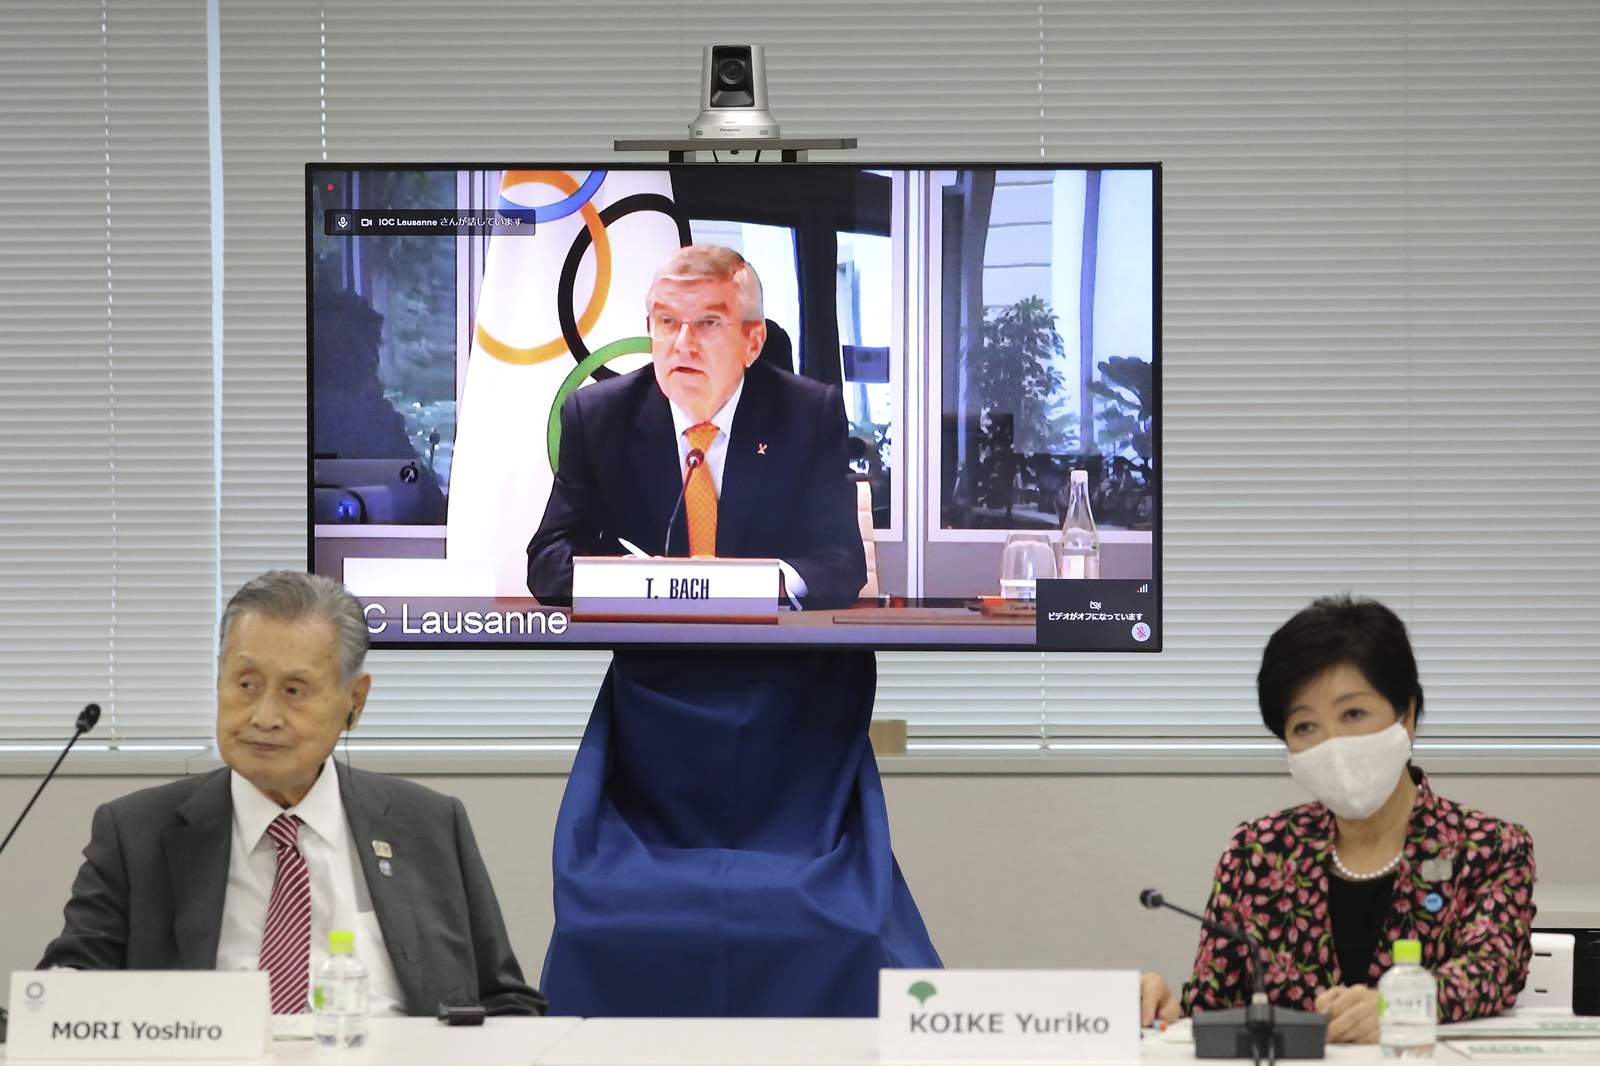 IOC gets official look at simplification for Tokyo Olympics